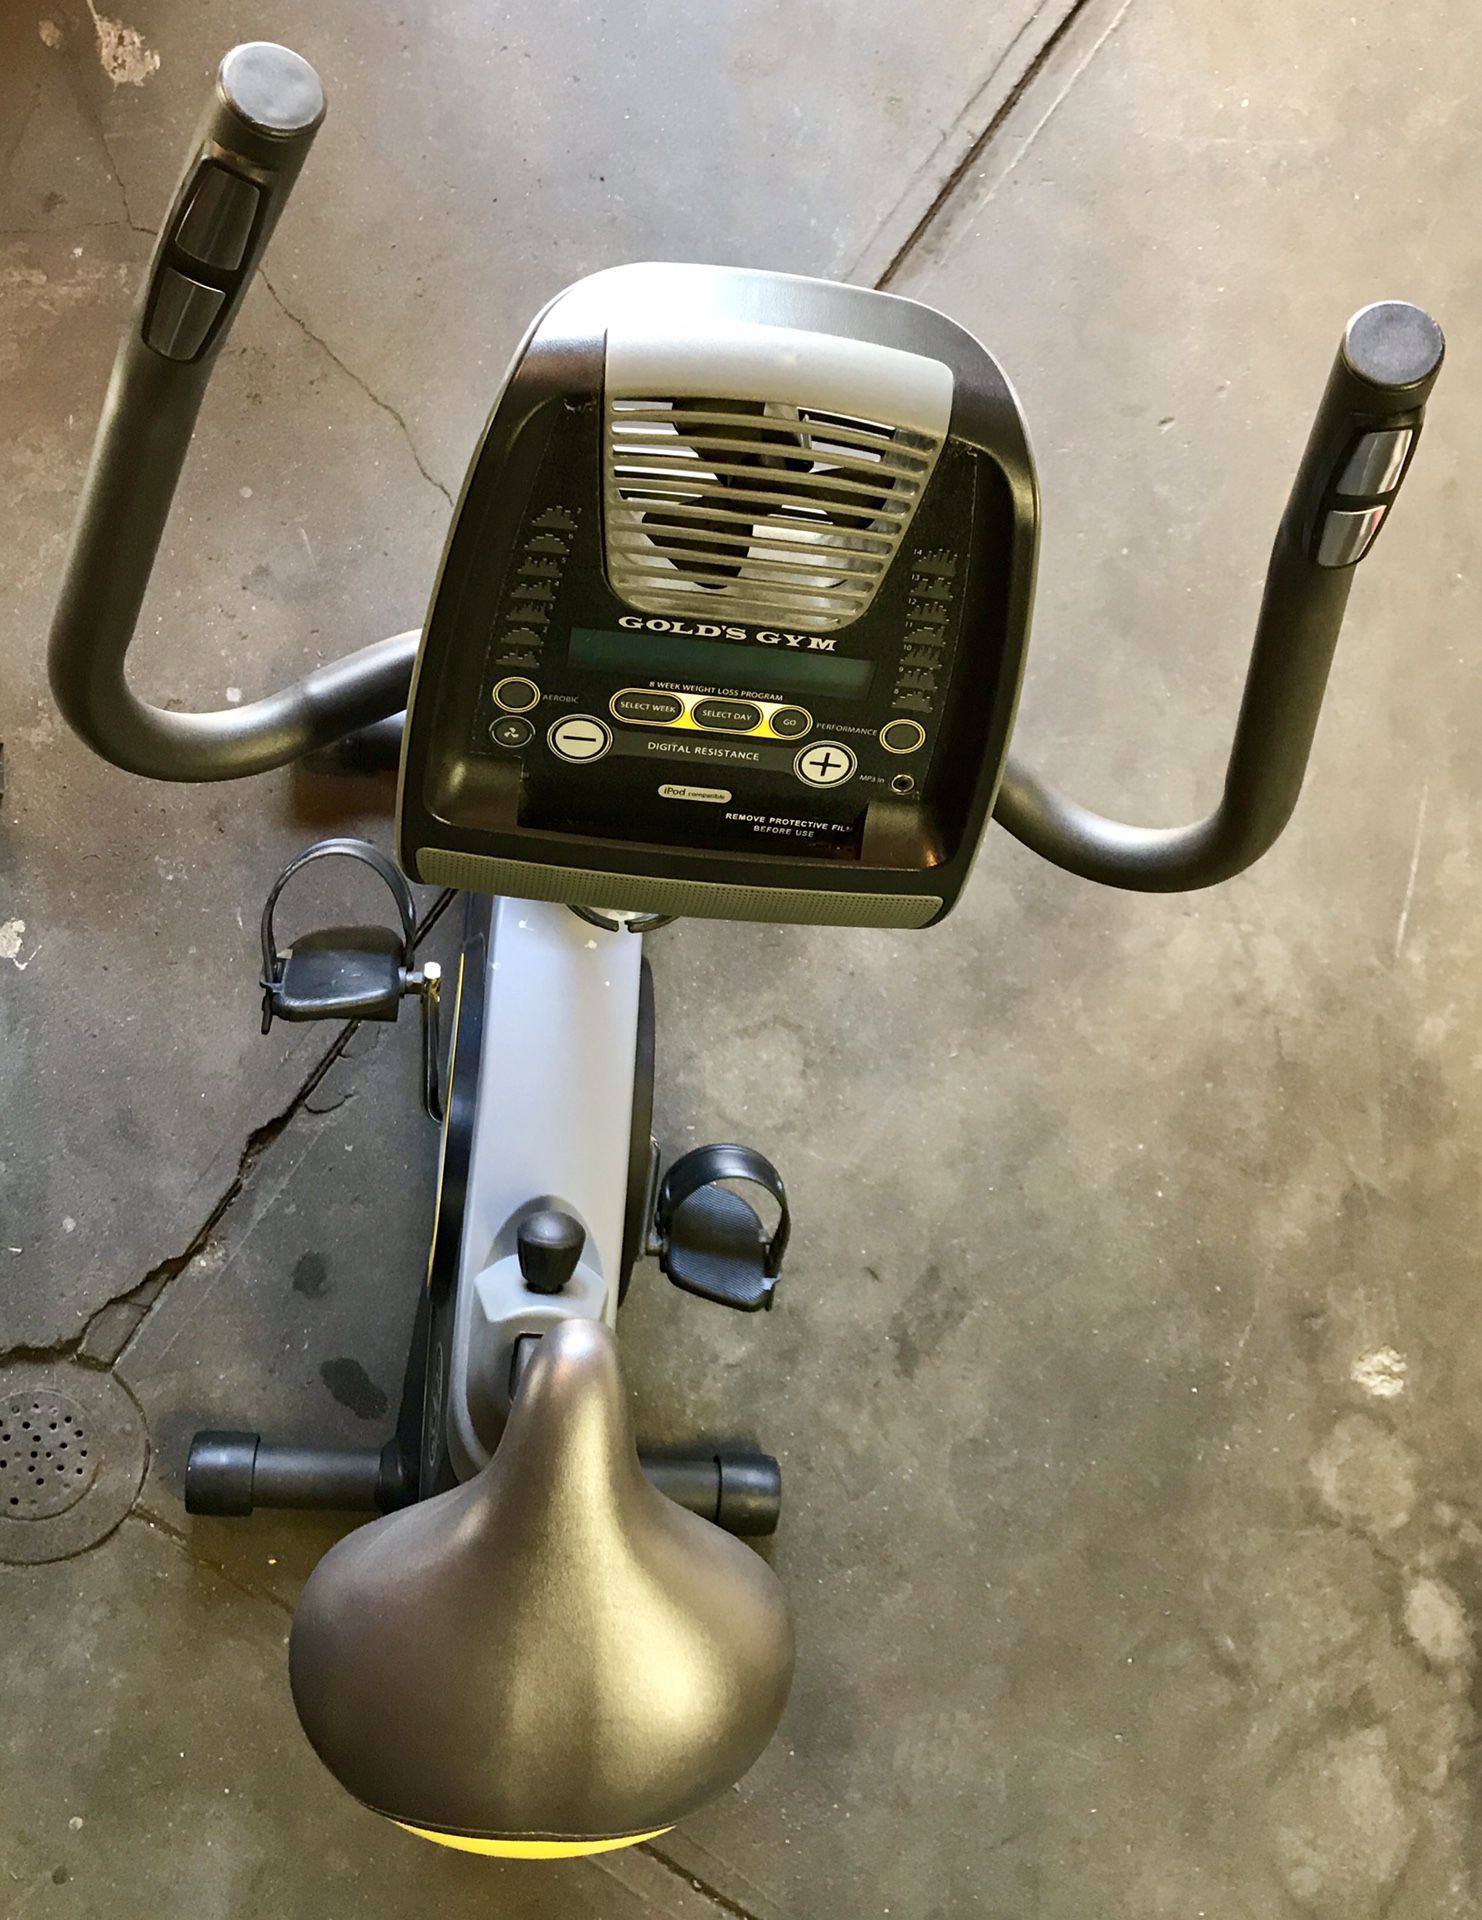 Golds Gym Cycle Trainer 290 C Upright Exercise Bike For Sale In Springfield Ma Offerup